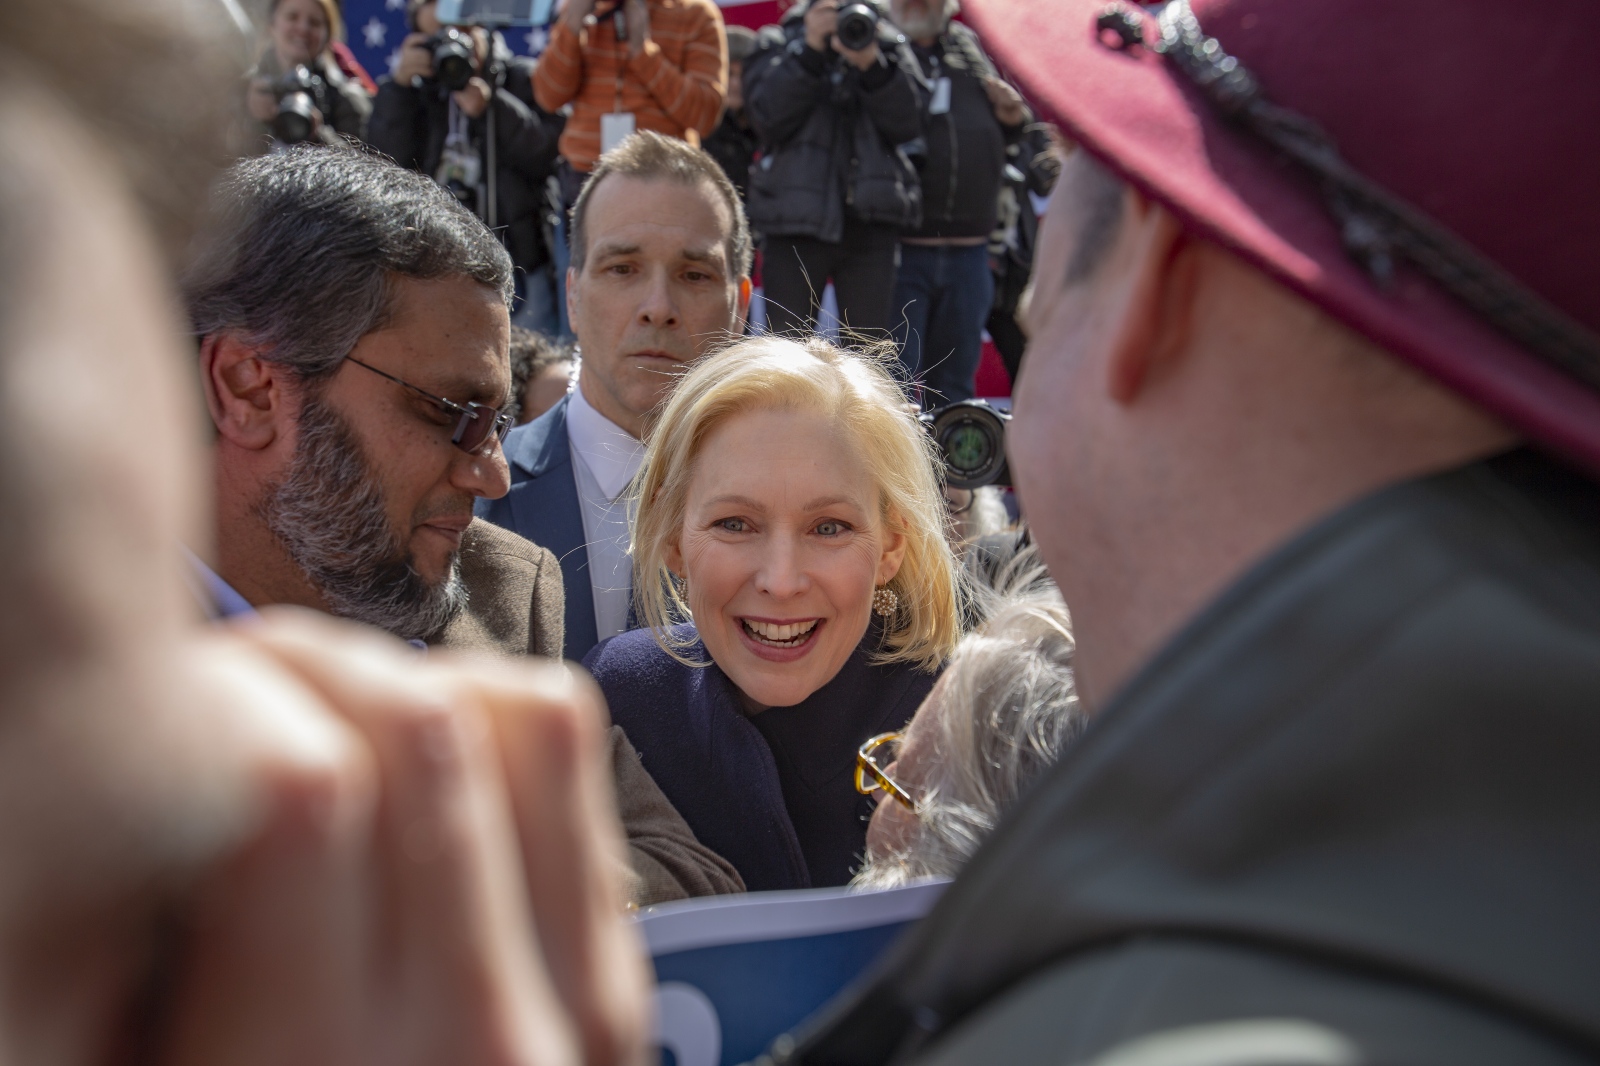 Image from A Time to Stand Up  - United States Senator Kirsten Gillibrand greets...